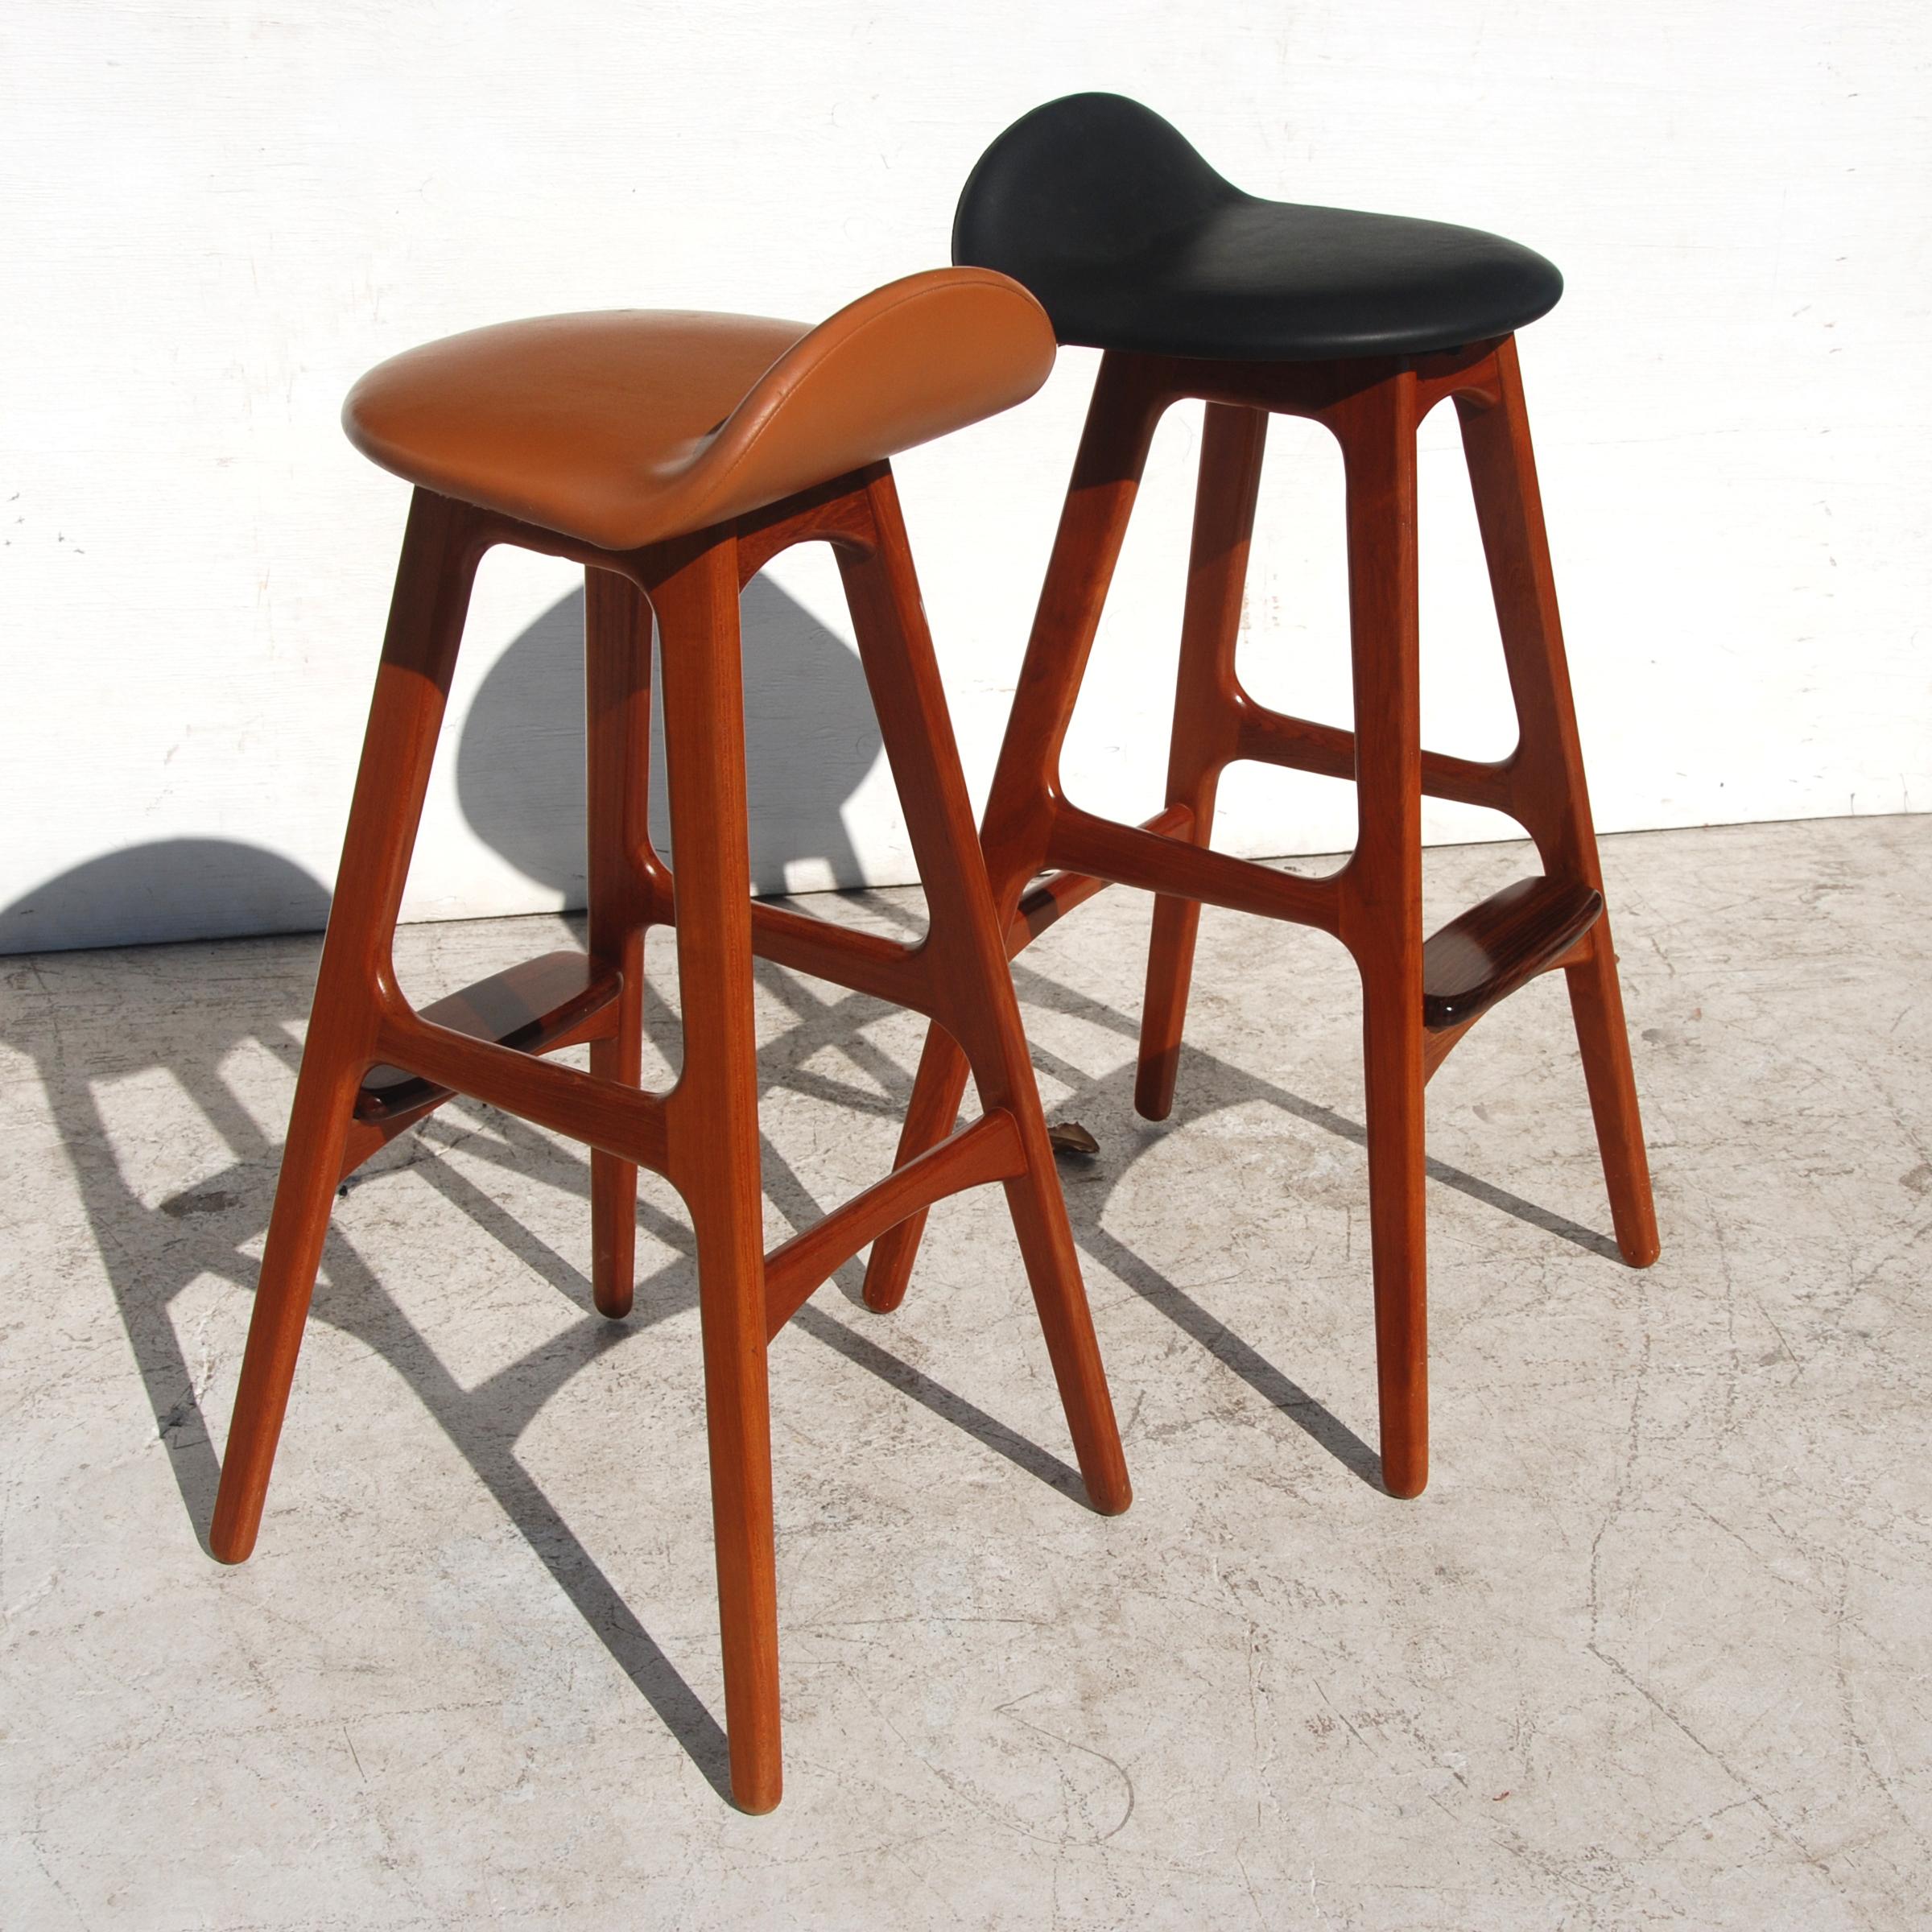 A Mid-Century Modern bar stool designed by Erik Buch and made by Oddense Maskinsnedkeri A-S. Teak frame with a rosewood footrest and leather upholstery.
Measures: Width 14.5